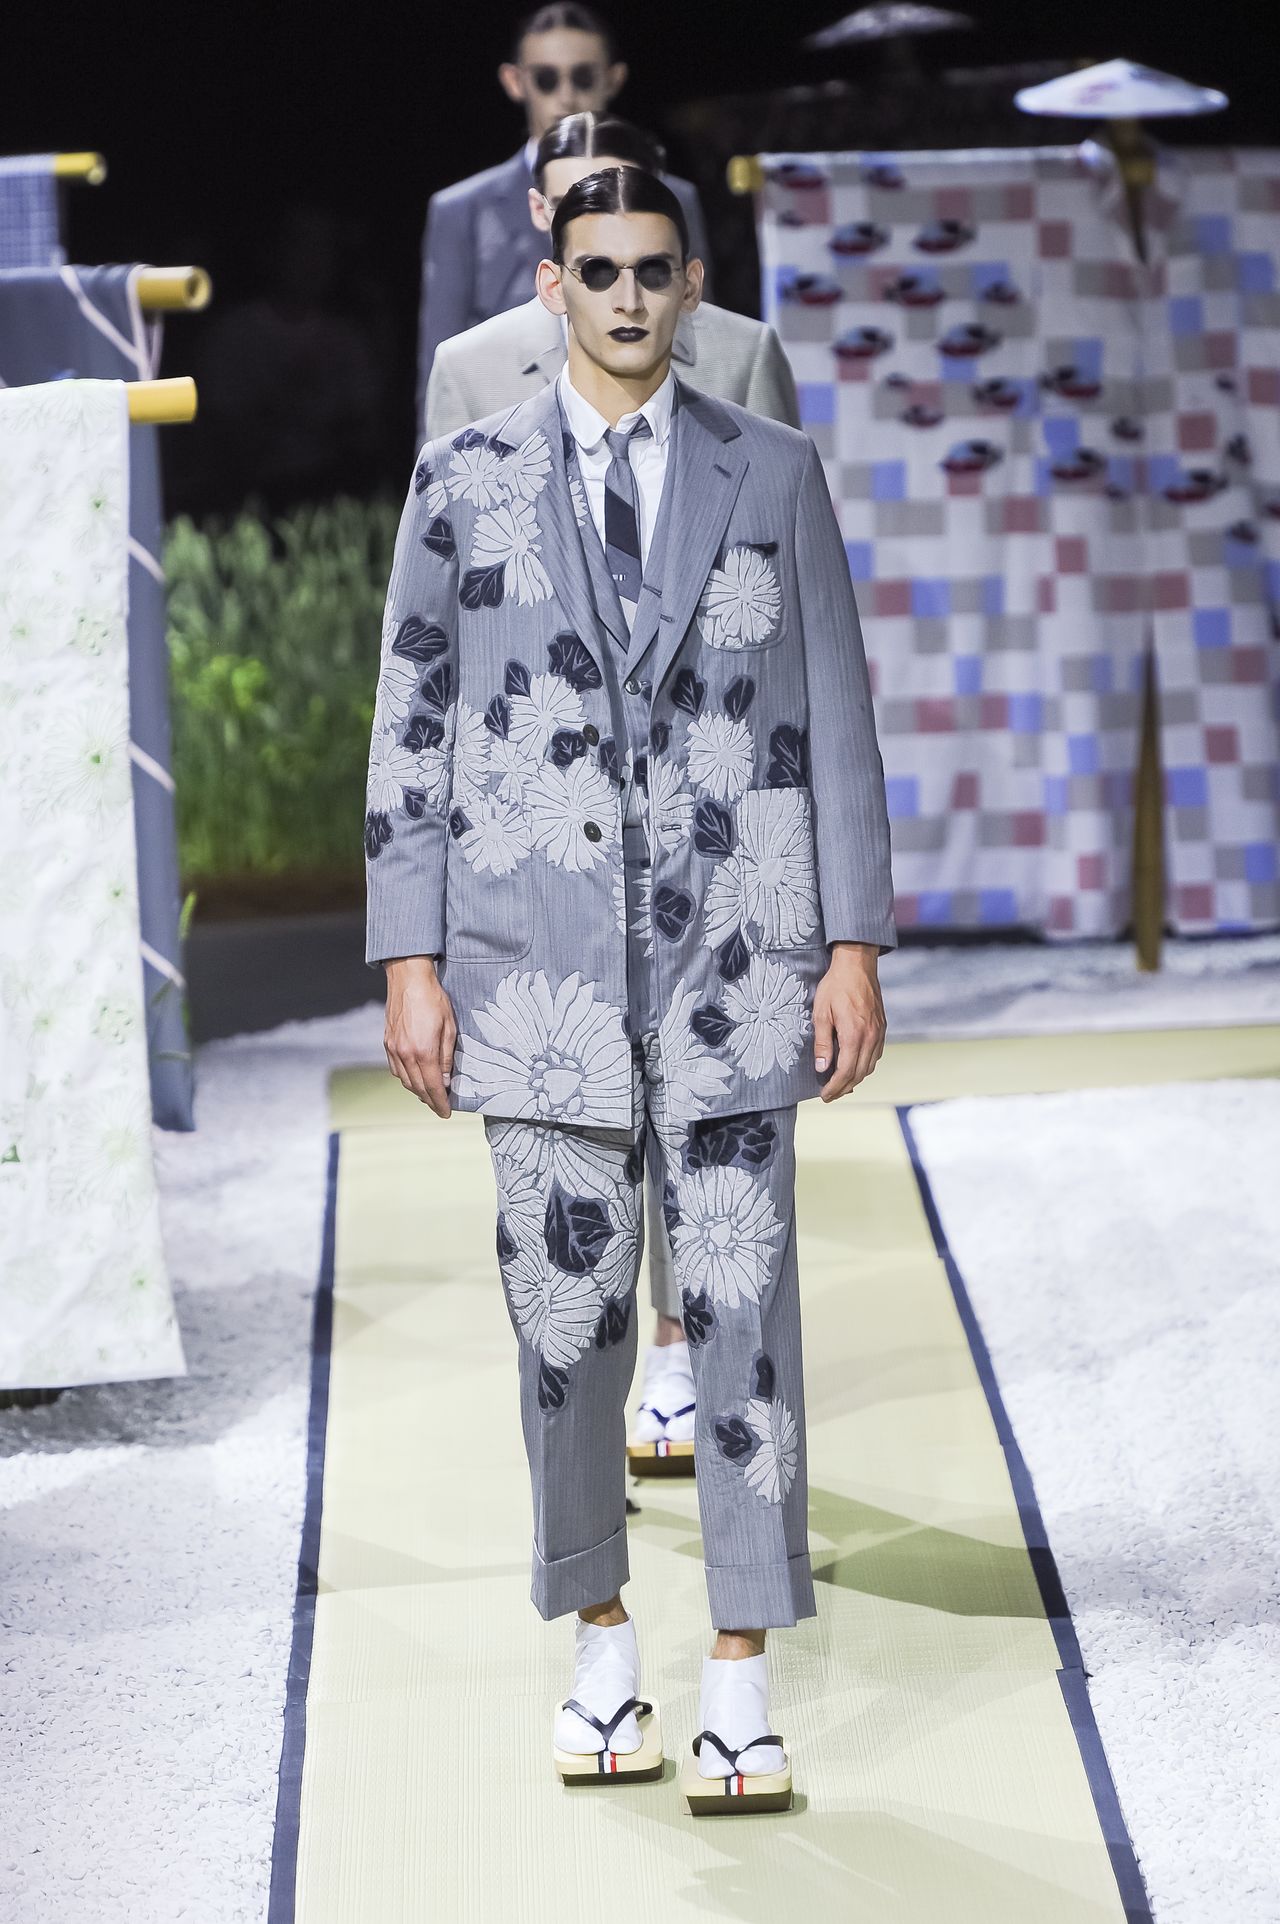 A men’s suit by Tom Brown for the spring/summer collection 2016. (© Fashion Press)